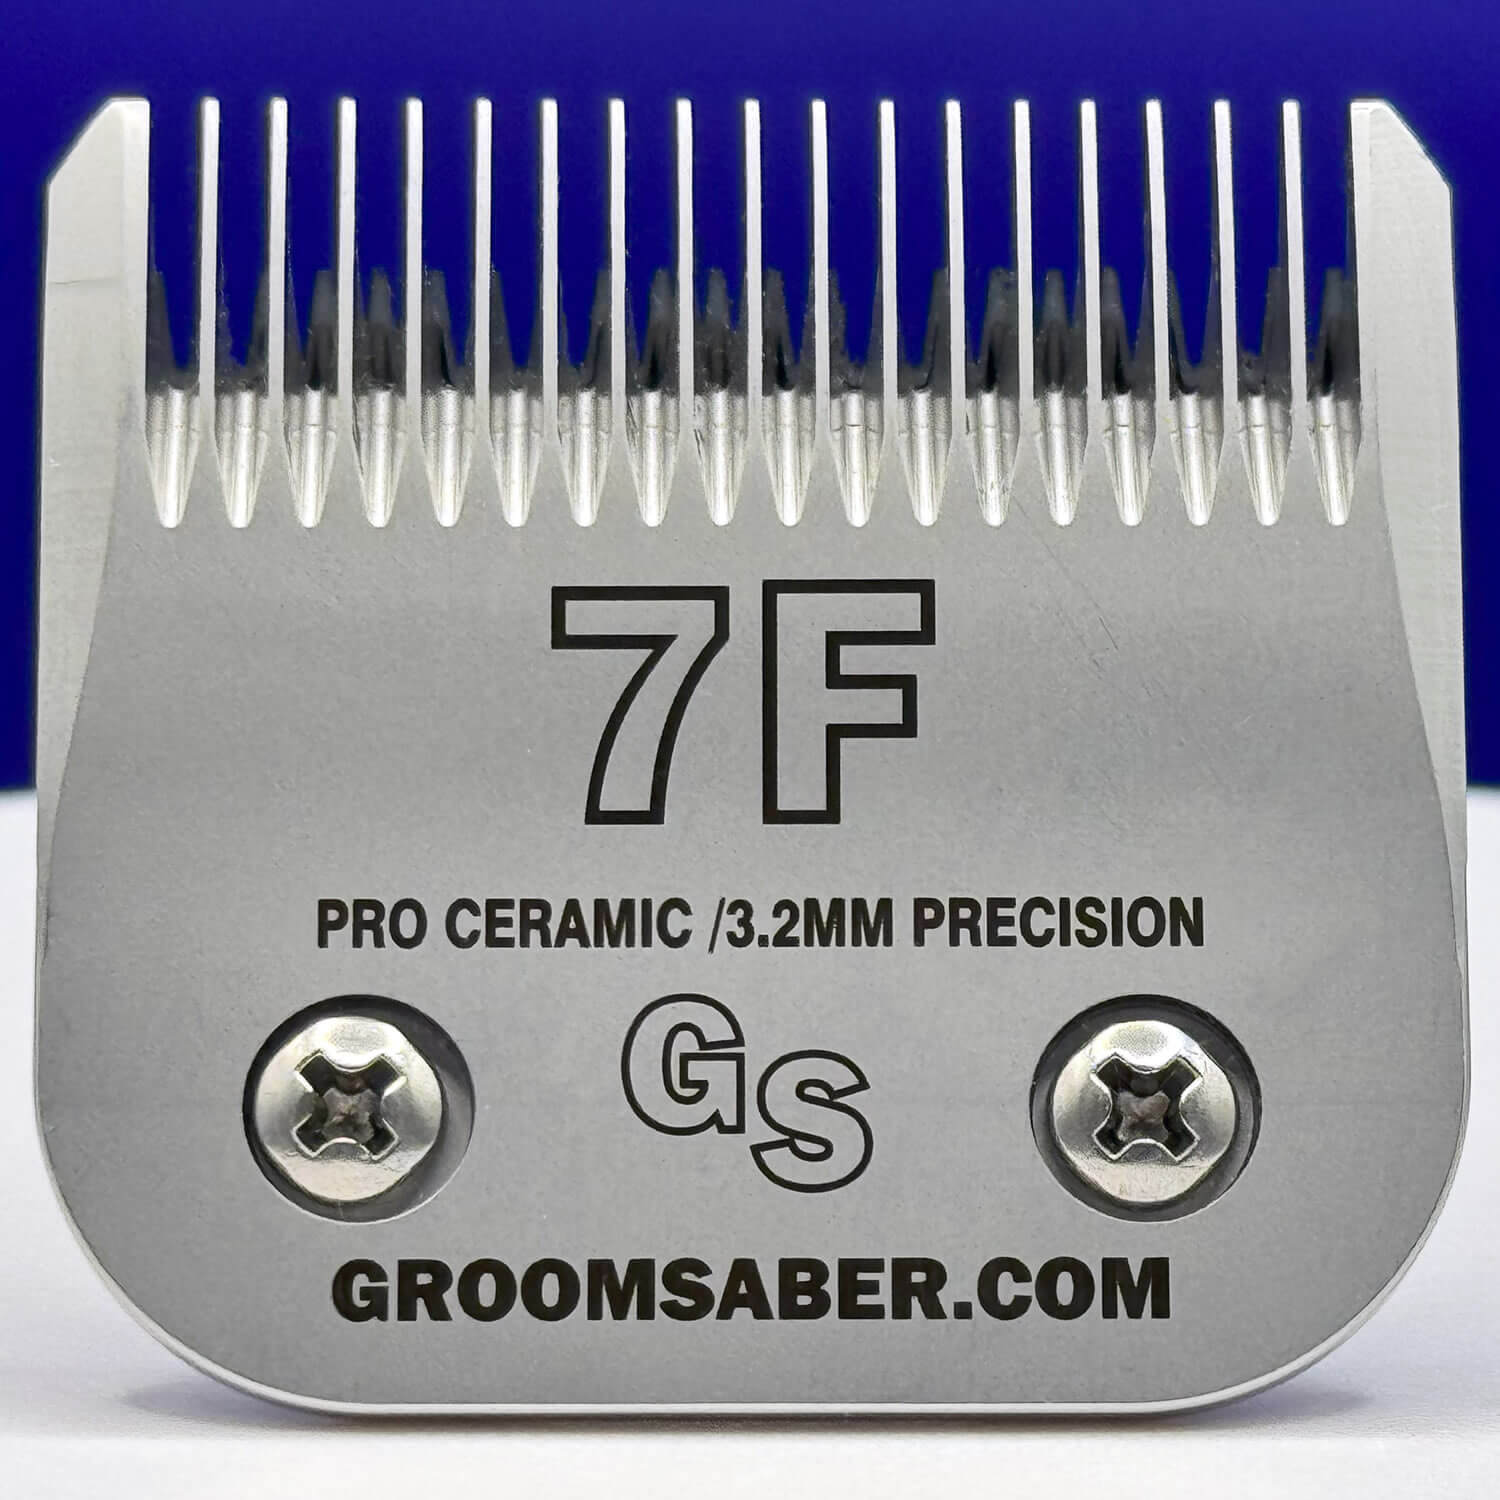 Full Set of Ceramic Clipper Blades with IvoryEdge Cutters